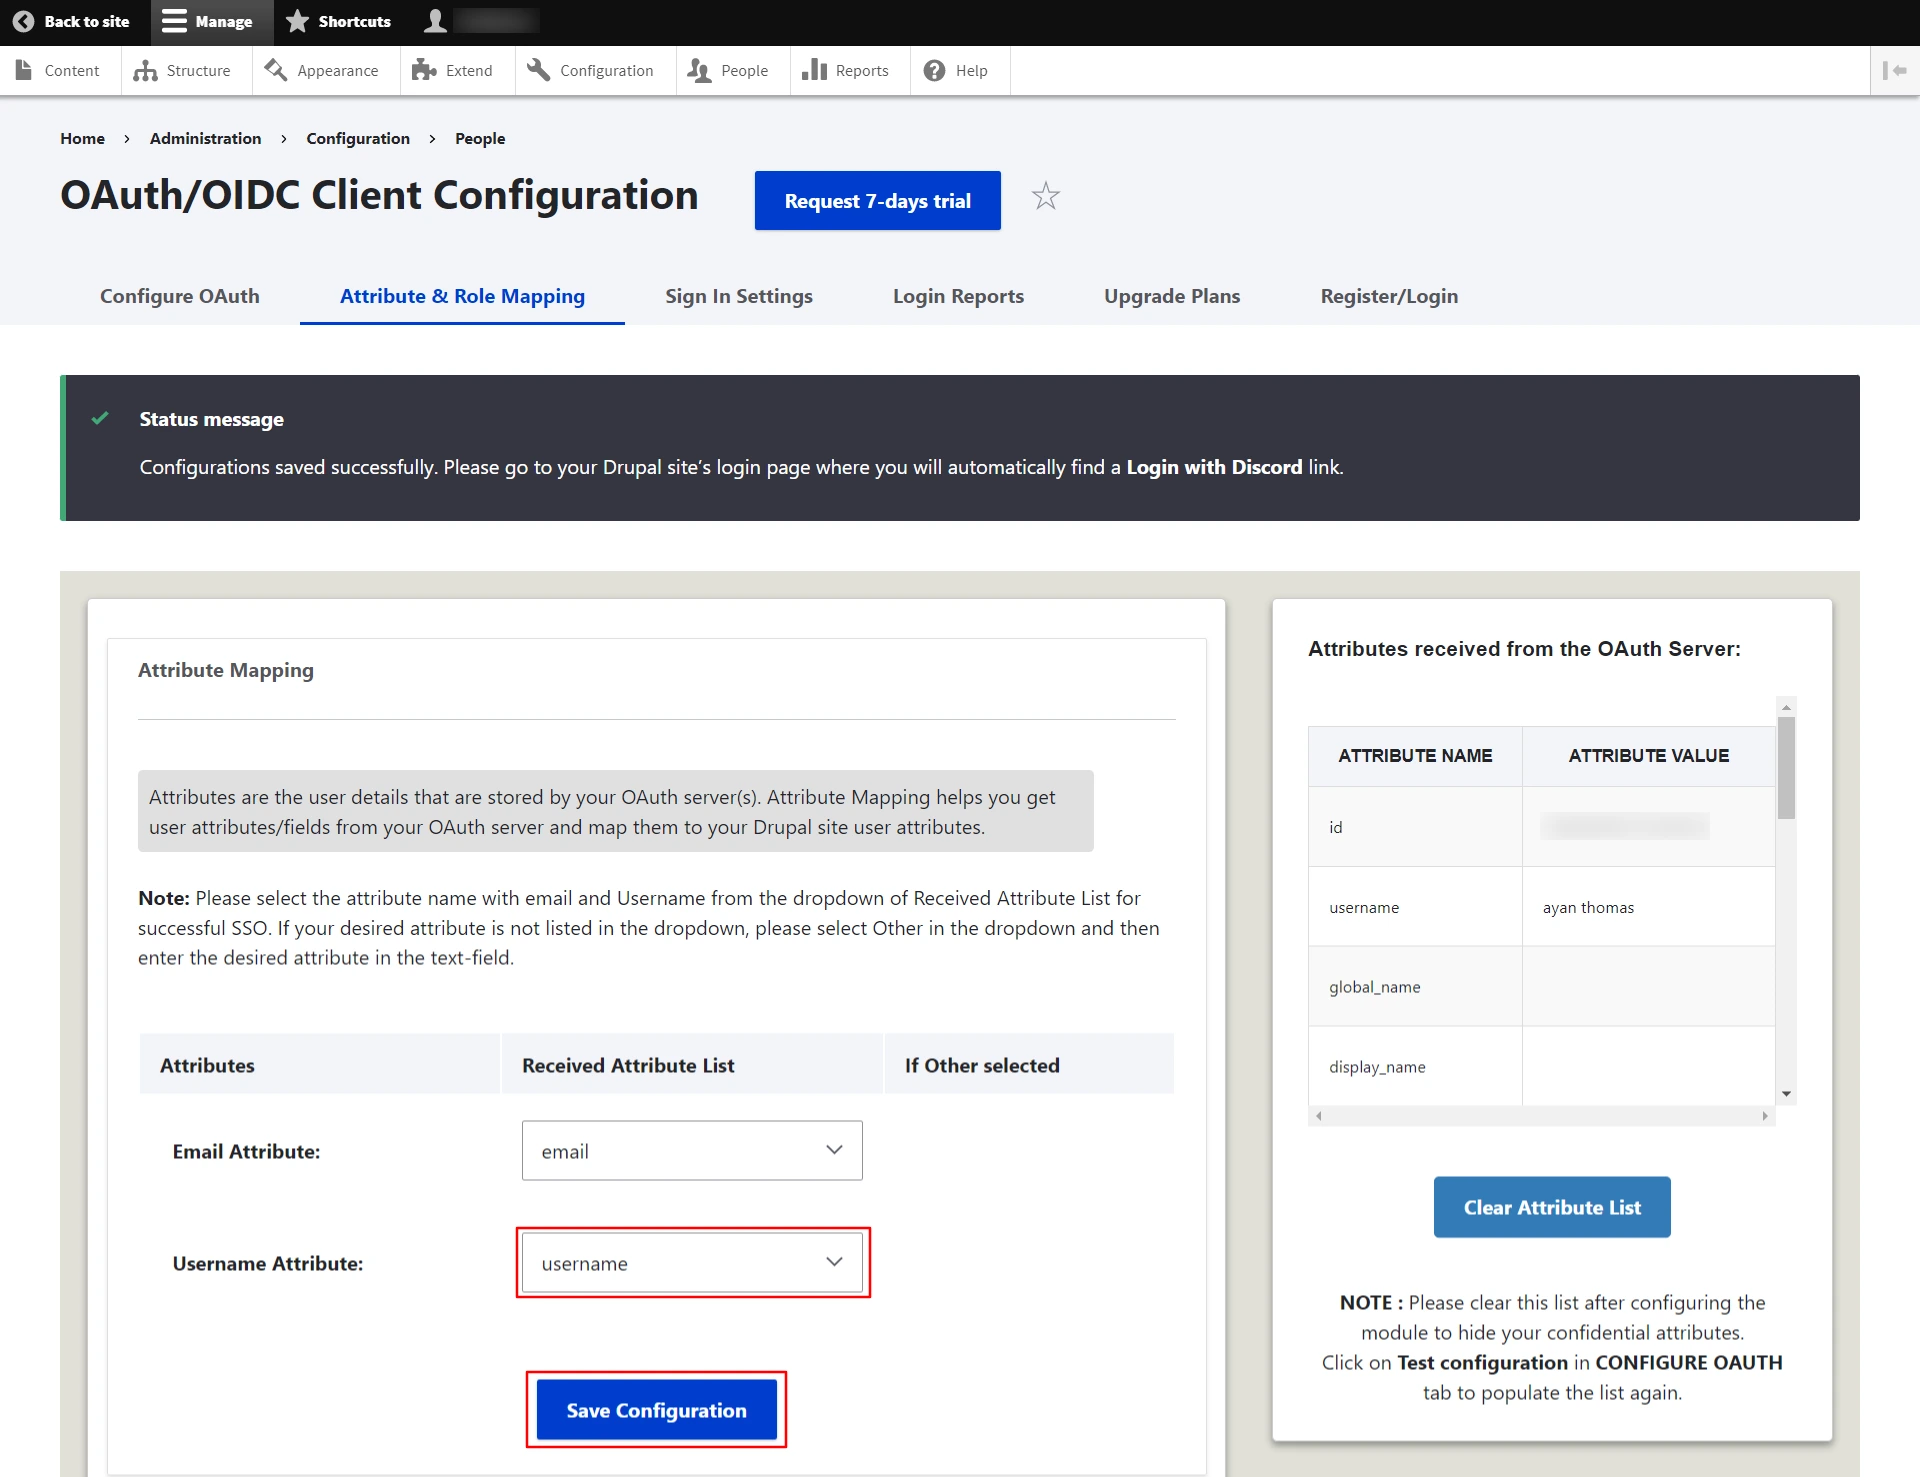 Drupal OAuth OpenID Single Single On Select Username Attribute From Attribute and Role Mapping tab